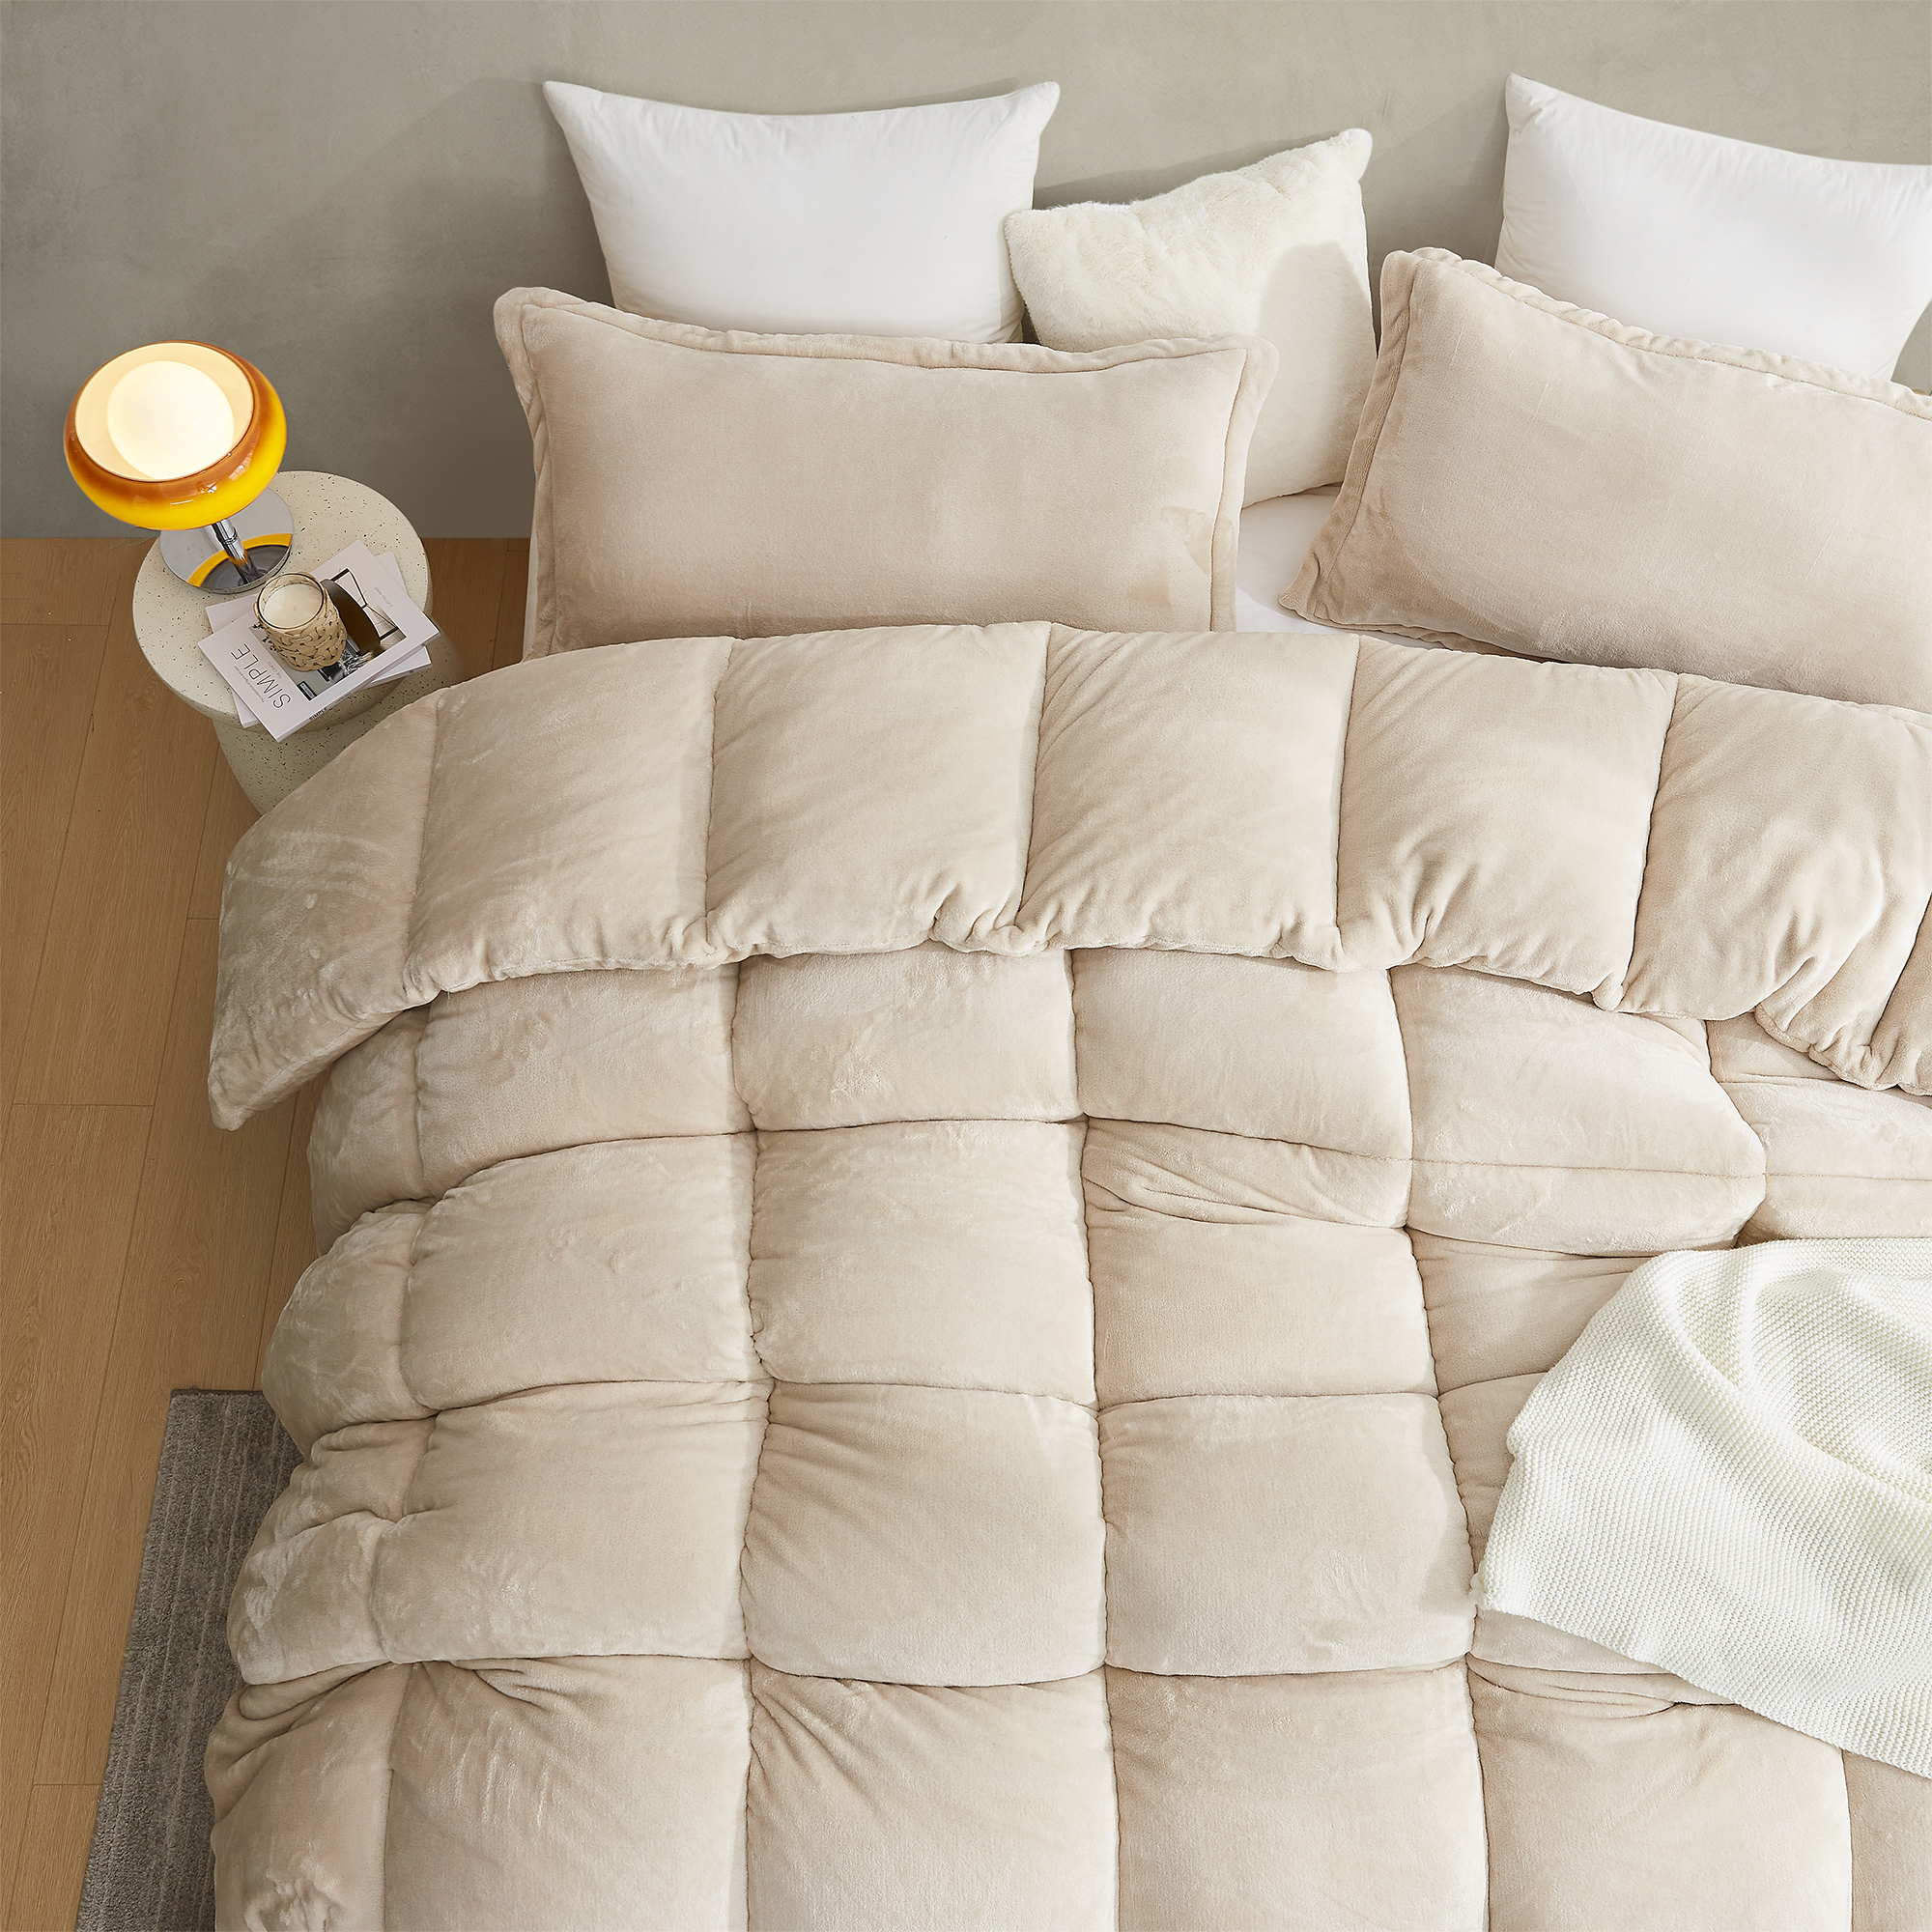 Thicker Than Thick - Coma Inducer Comforter - Down Alternative Ultra Plush Filling - Birch